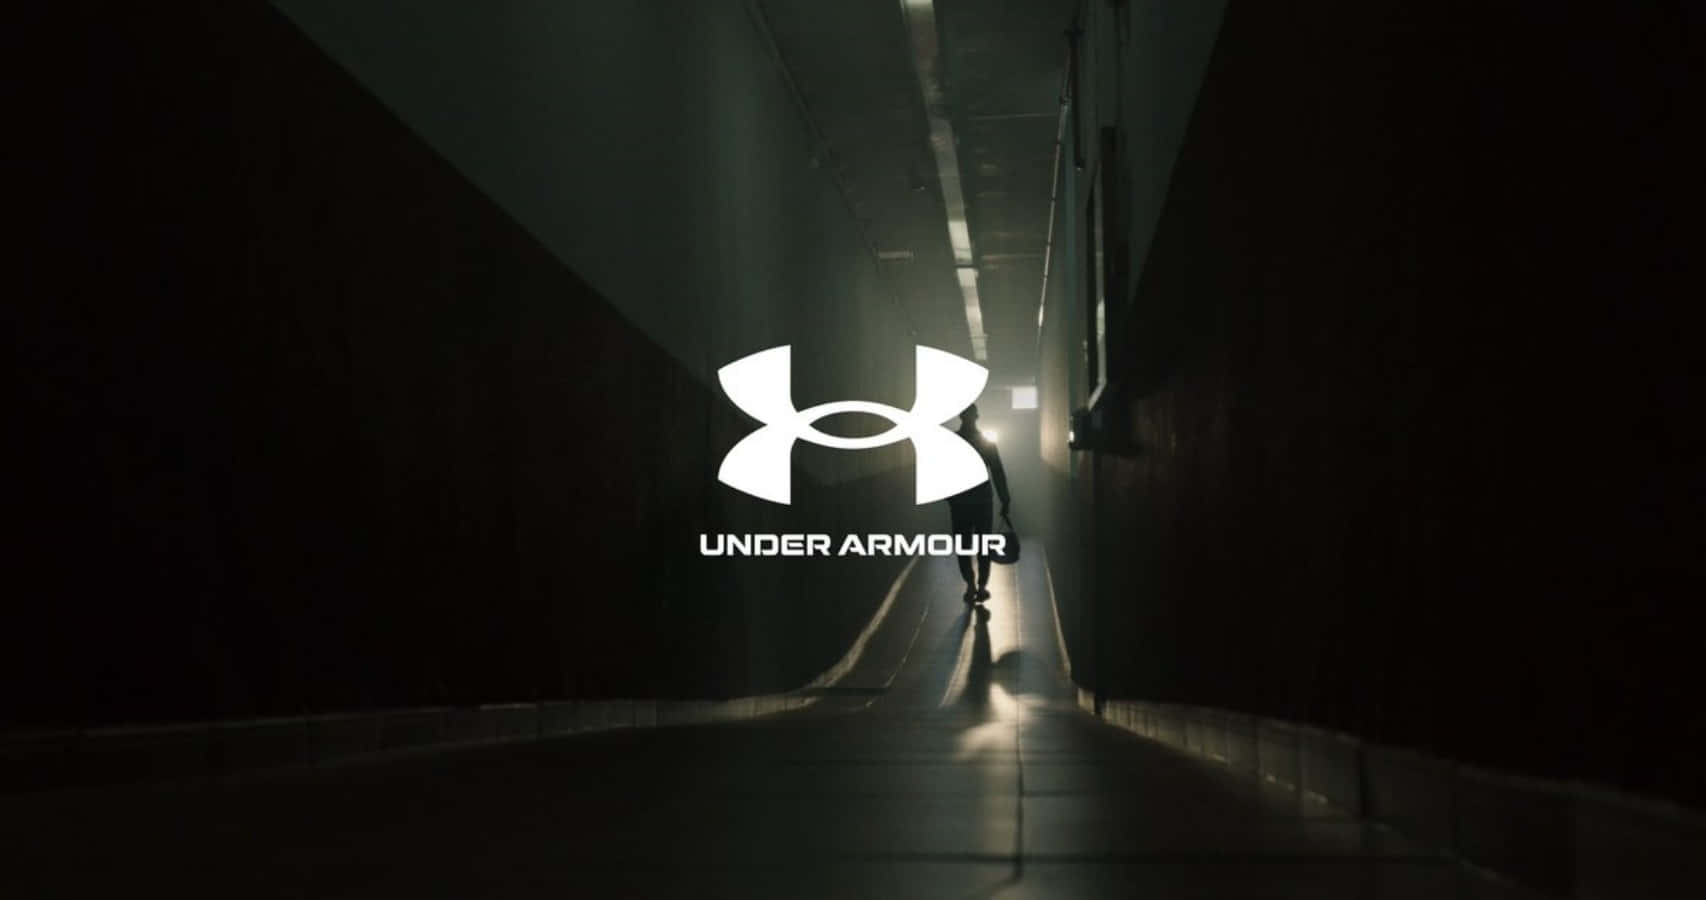 You Can Do More with Under Armour